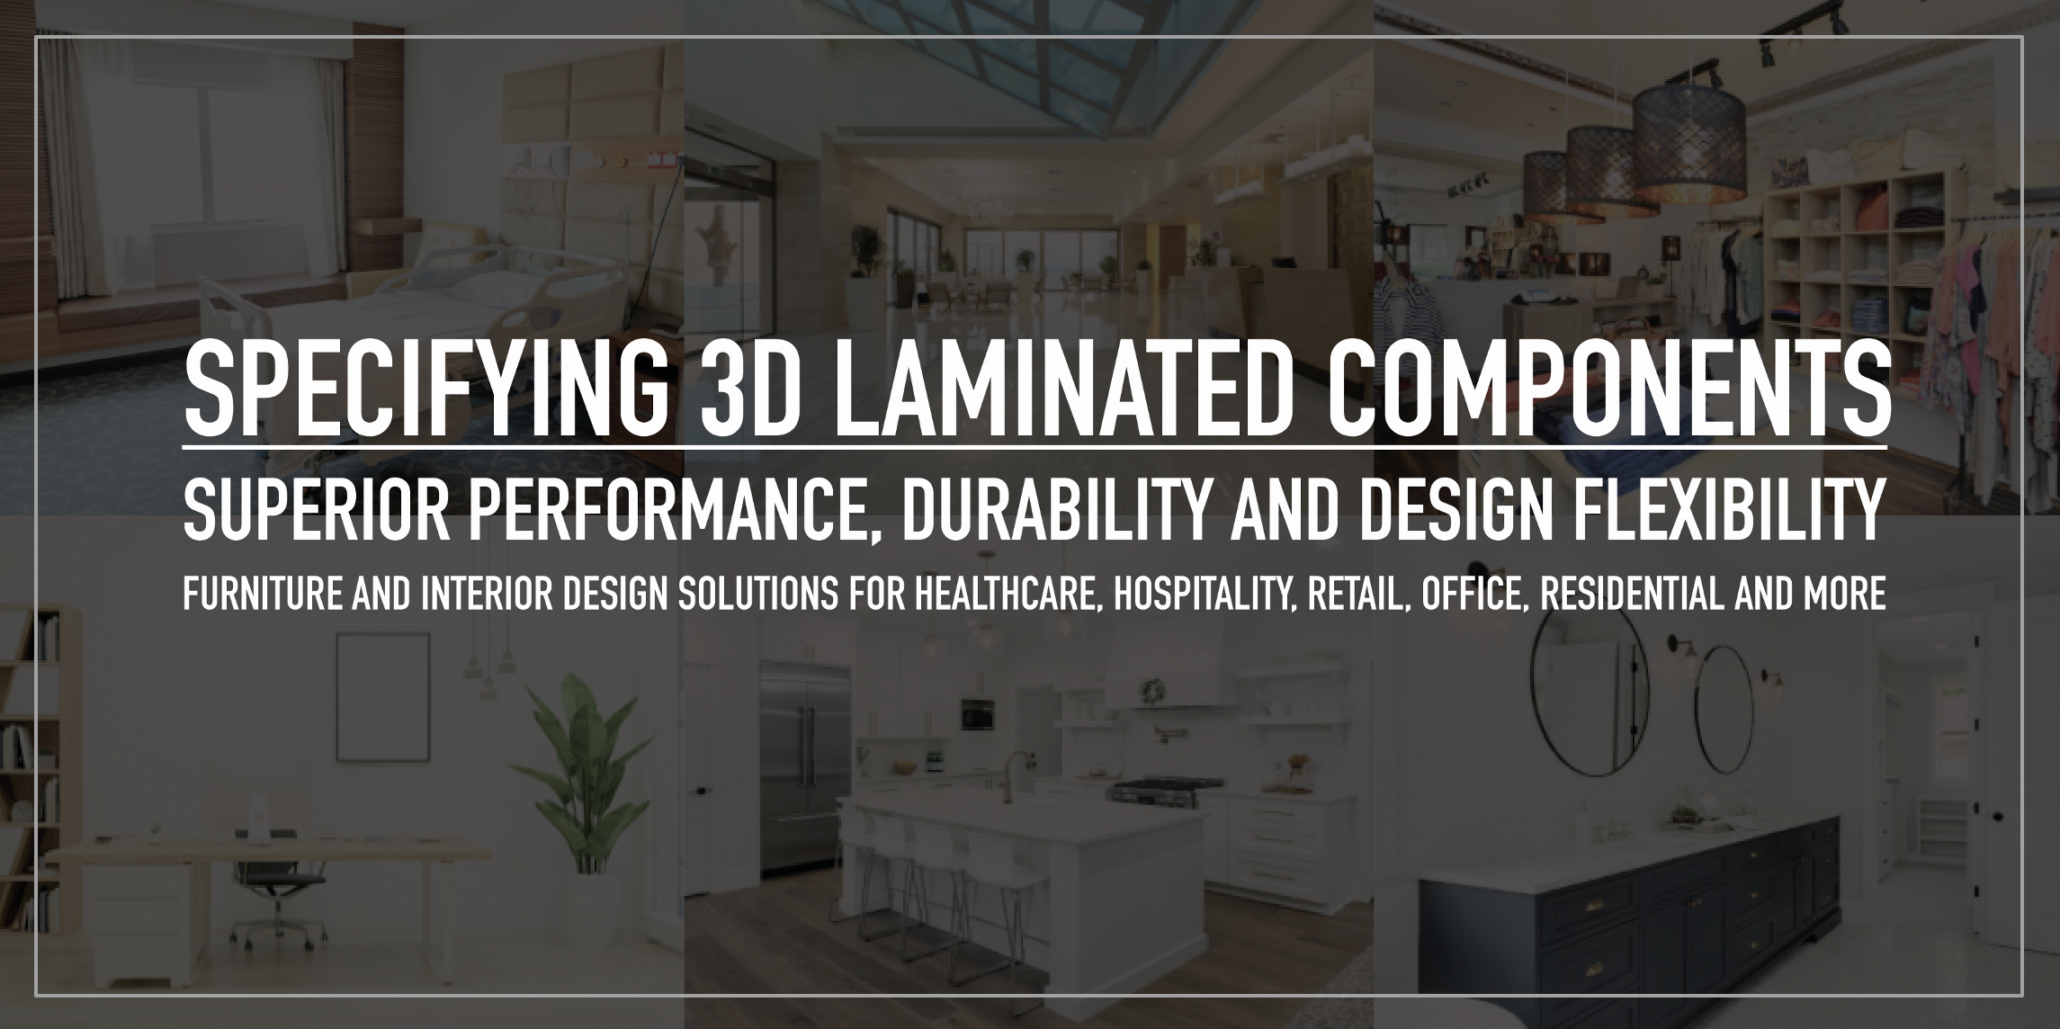 3D Laminated Components